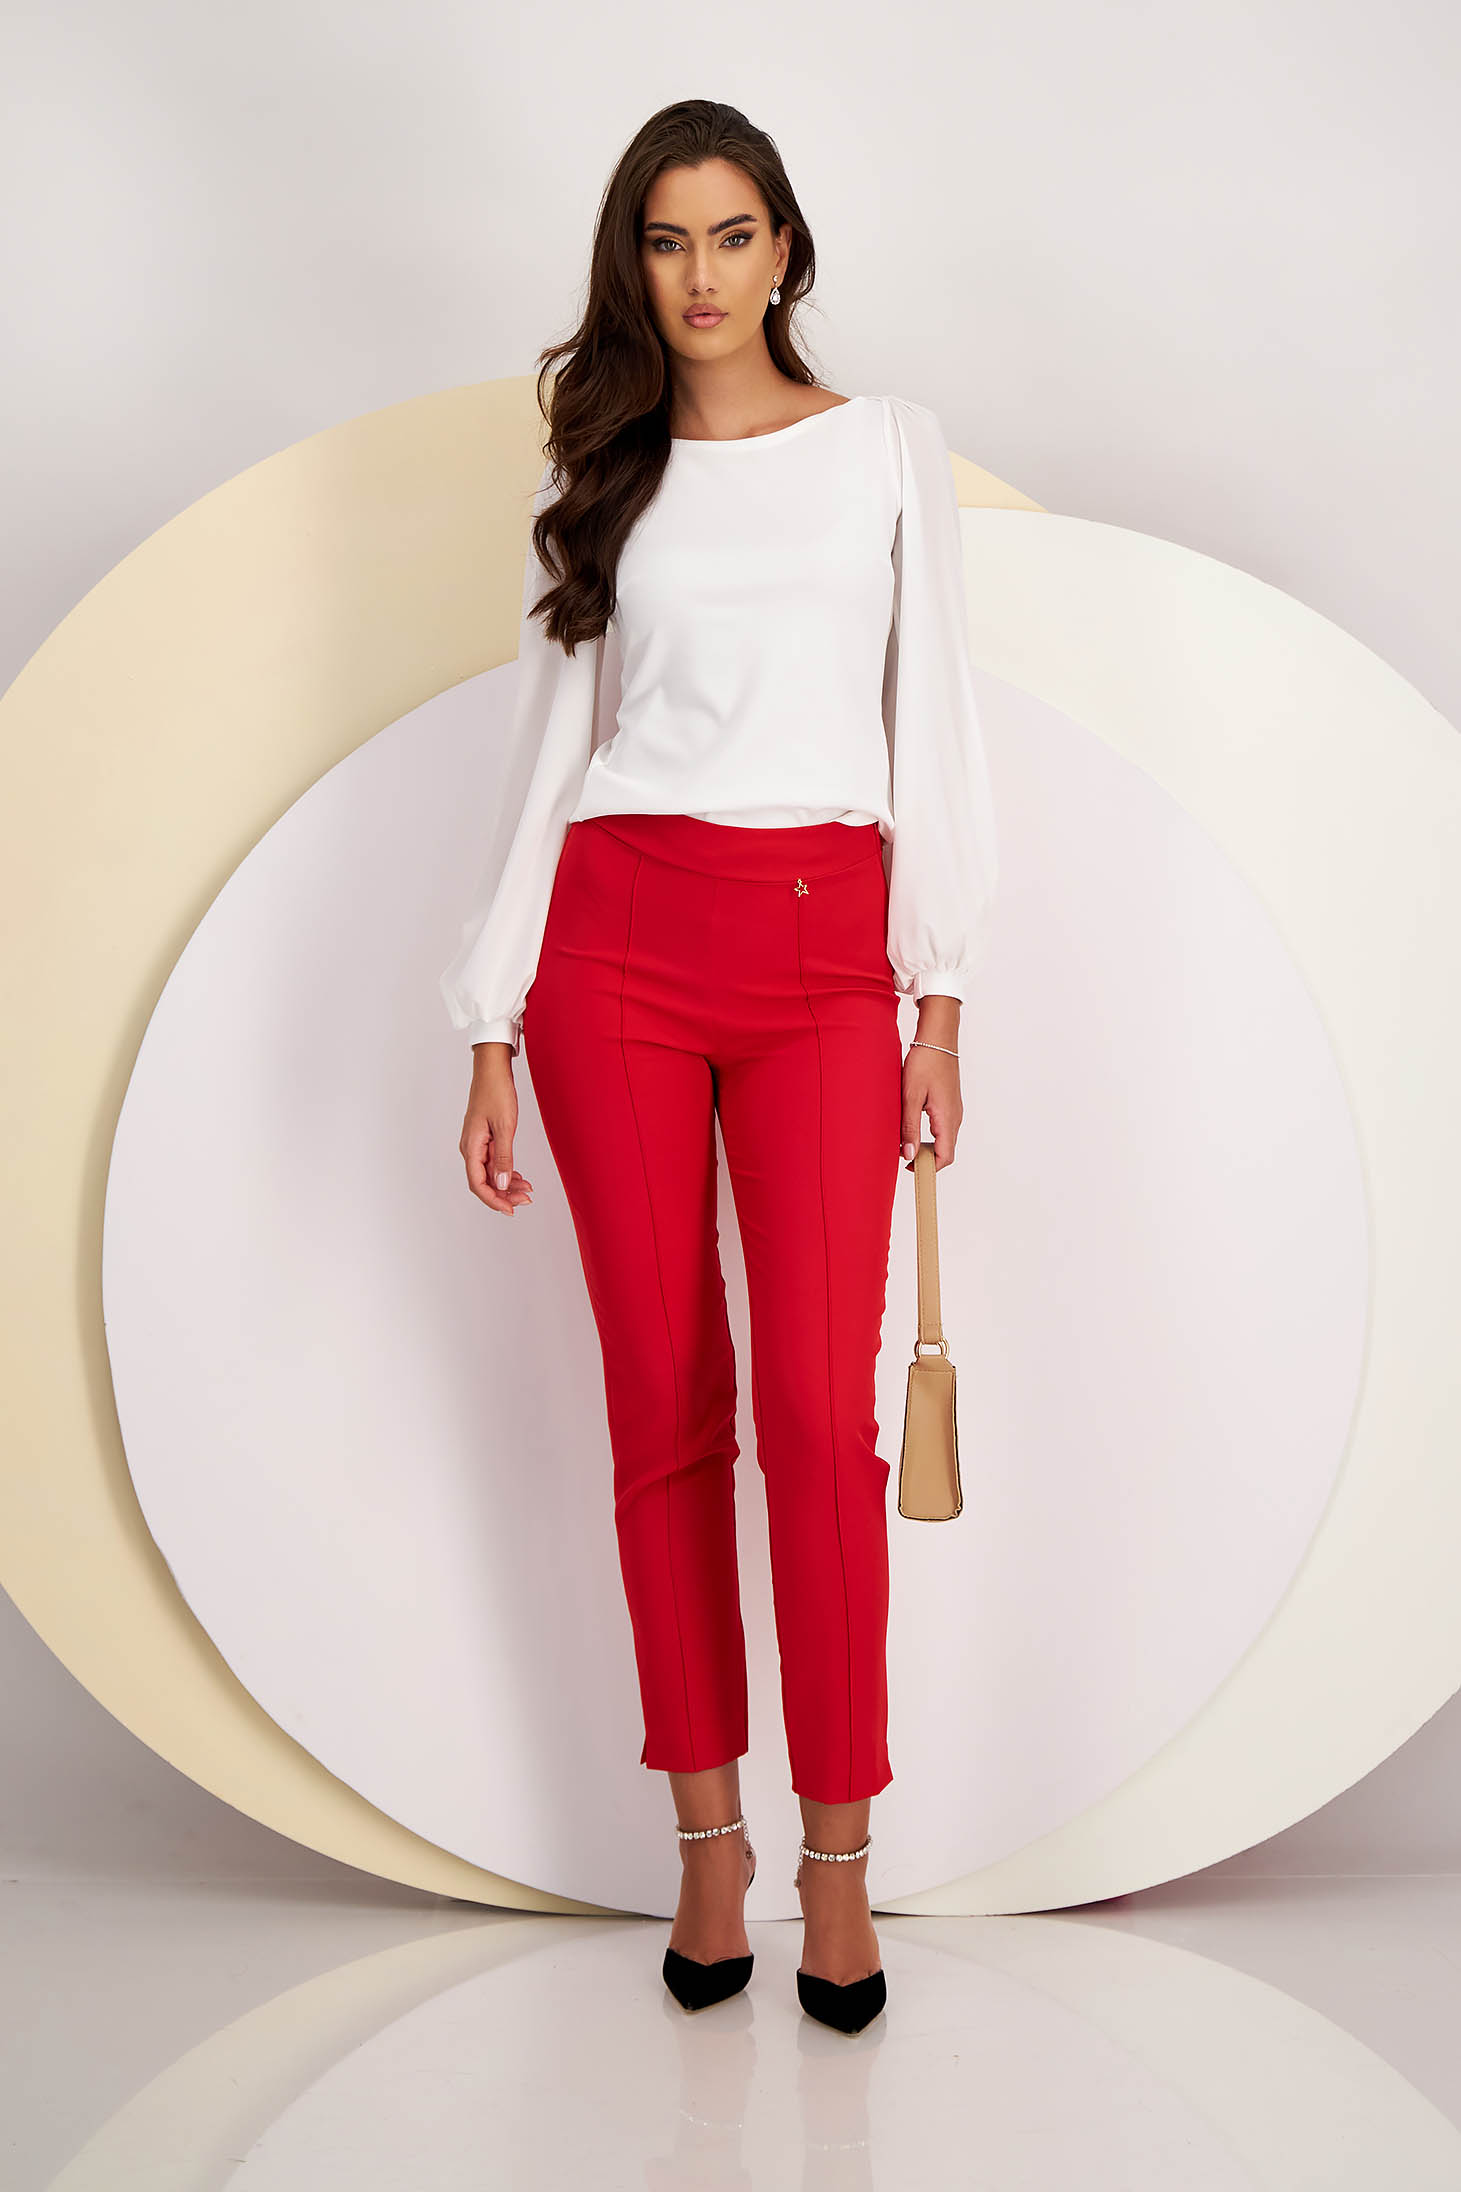 High-Waisted Red Tapered Trousers made from Slightly Stretchy Fabric - StarShinerS 3 - StarShinerS.com